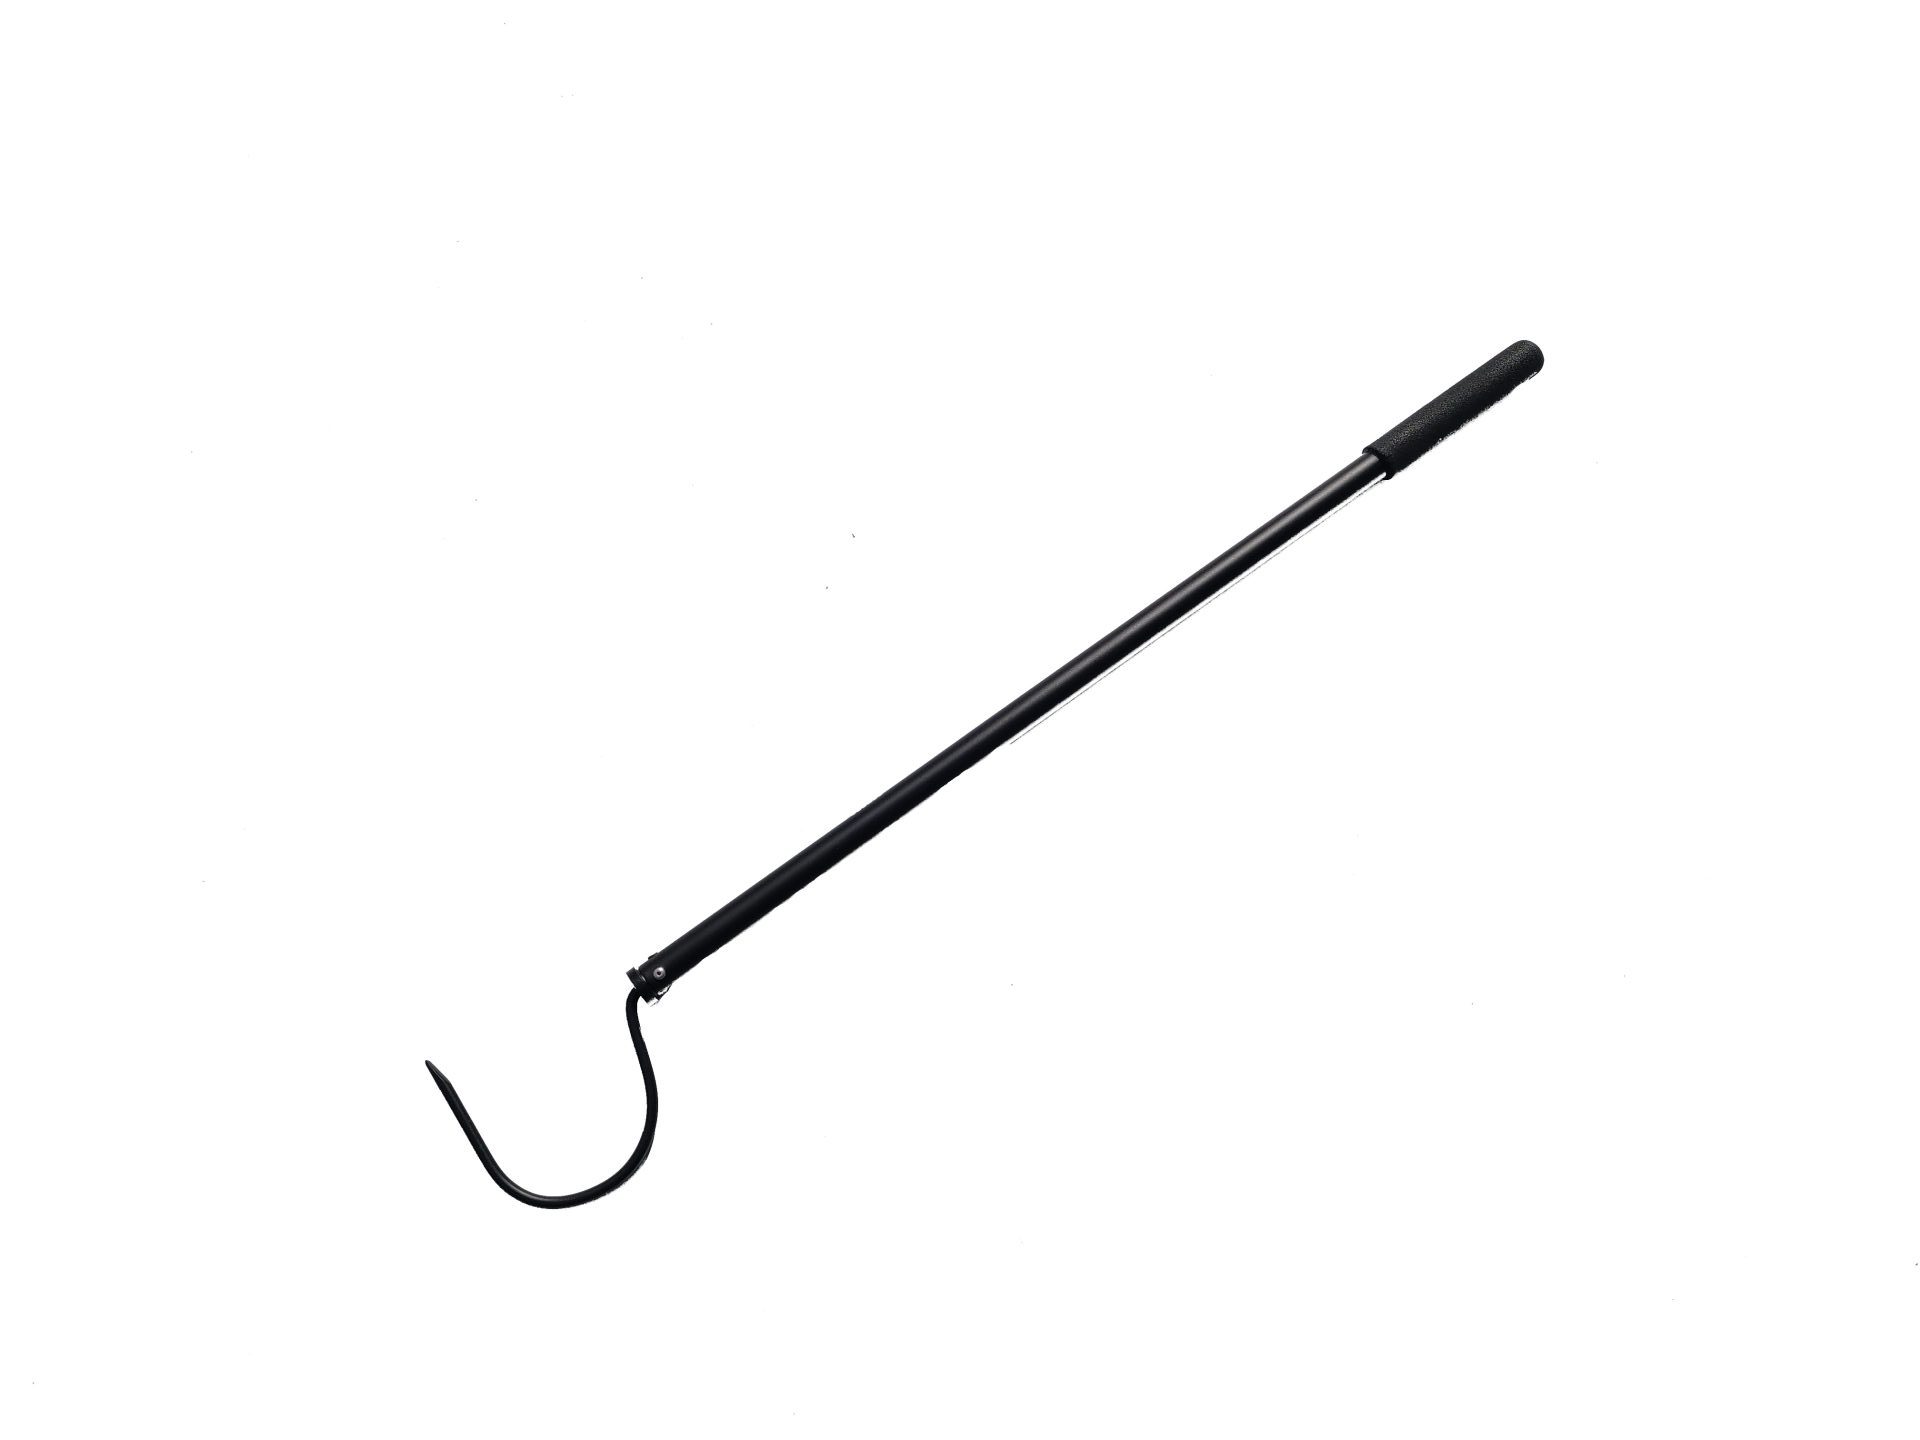 Oldham Chemical Company. Tomahawk Extendable Snake Hook